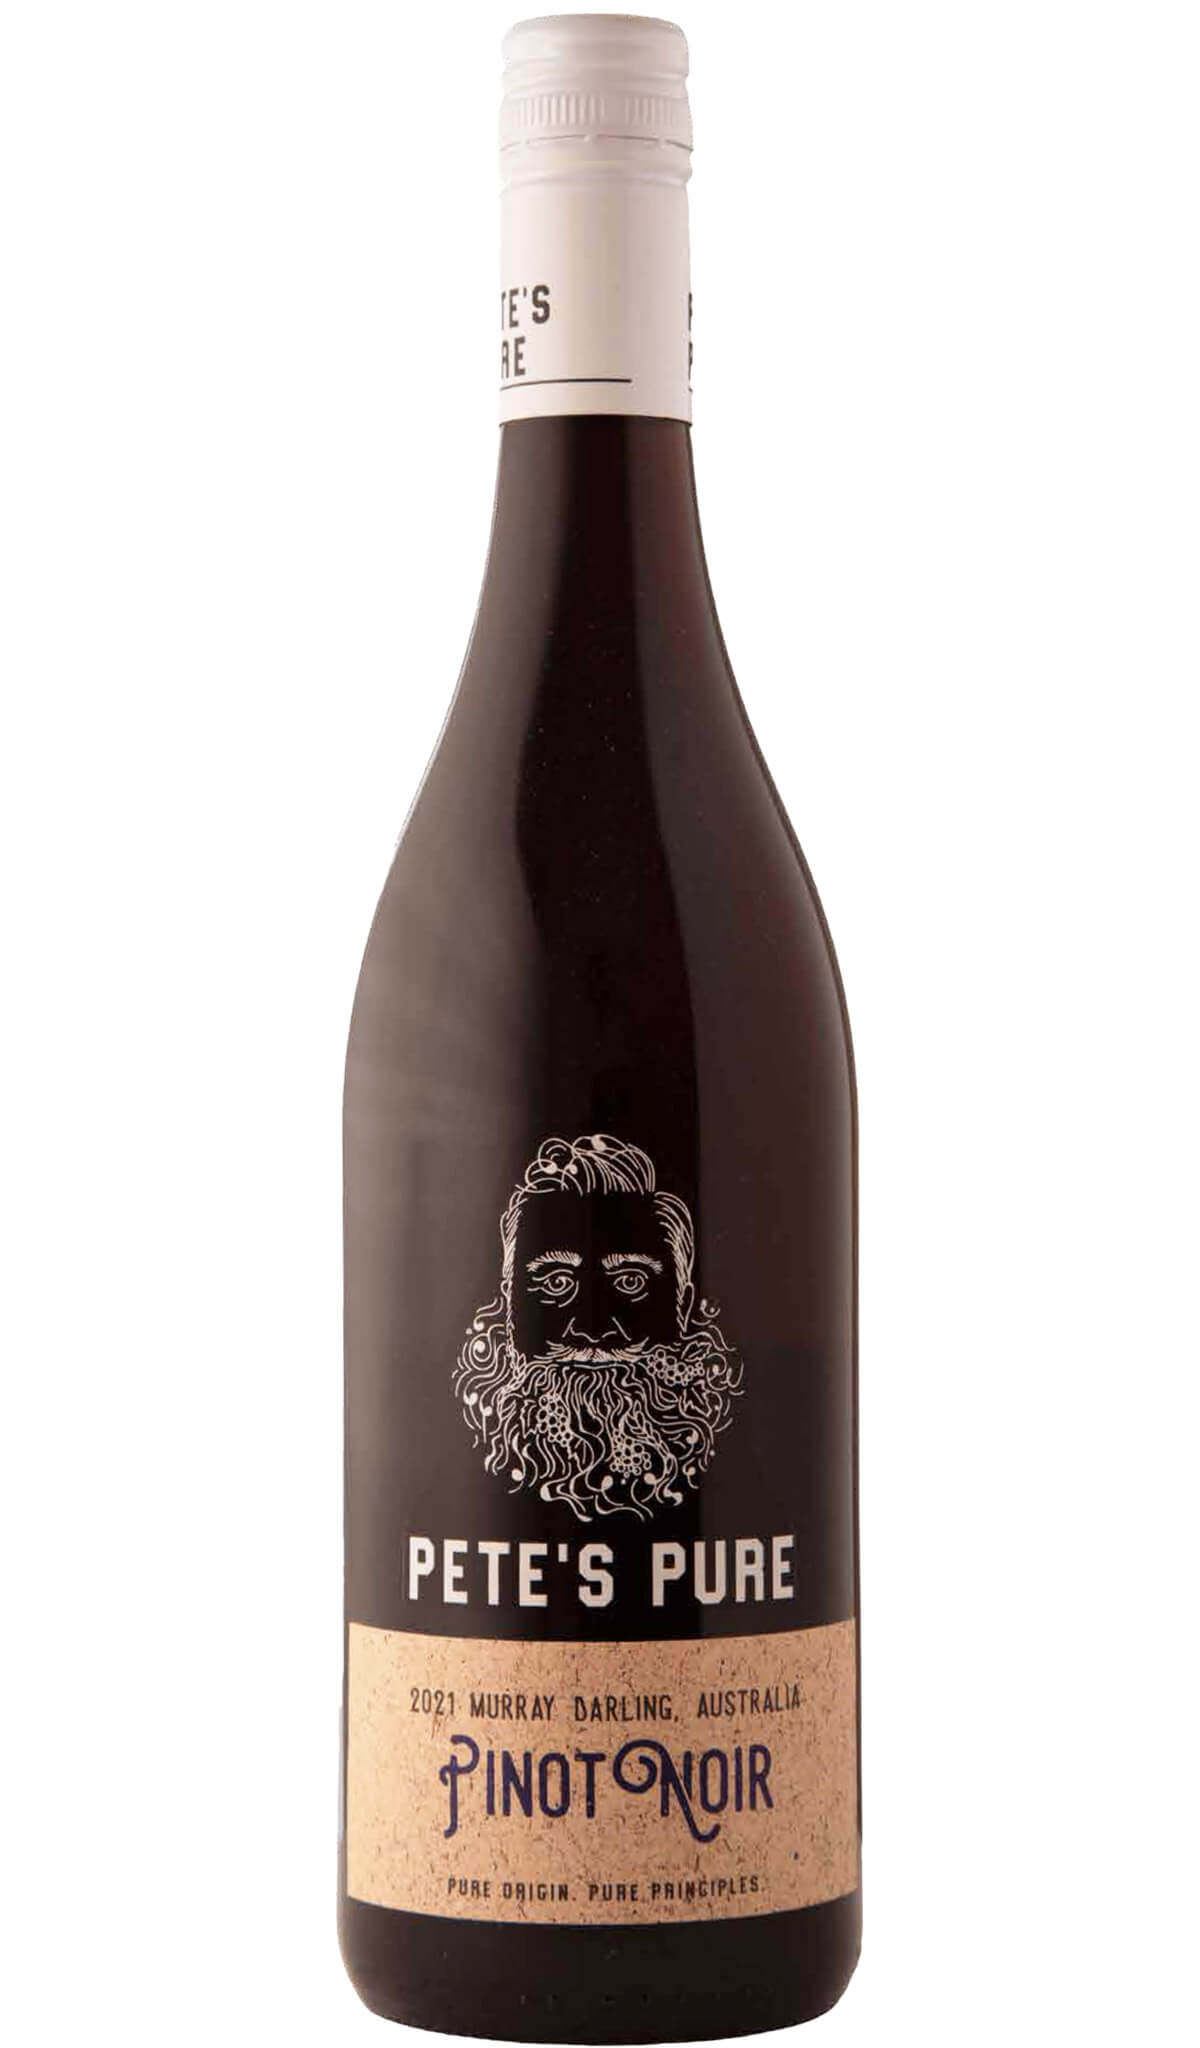 Find out more, explore the range and purchase Pete's Pure Pinot Noir 2021 available online at Wine Sellers Direct - Australia's independent liquor specialists.